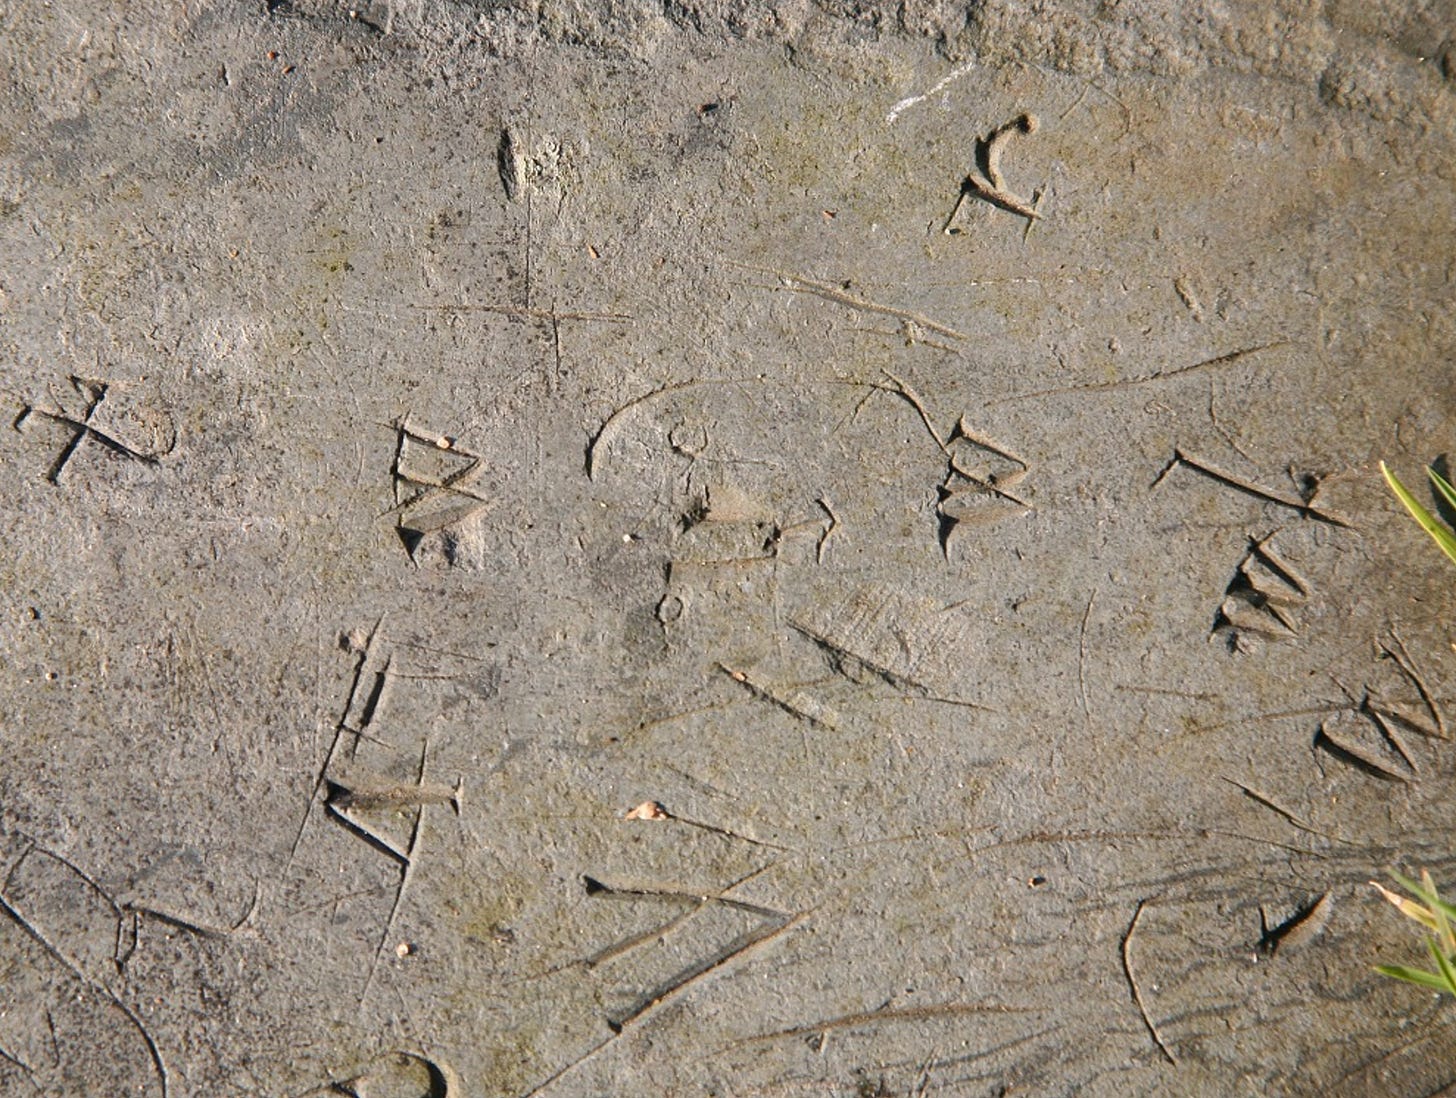 A piece of stone with rough, poorly formed letters scattered upon it. We can see a number of w’s, an r, t, and several unfinished strokes.